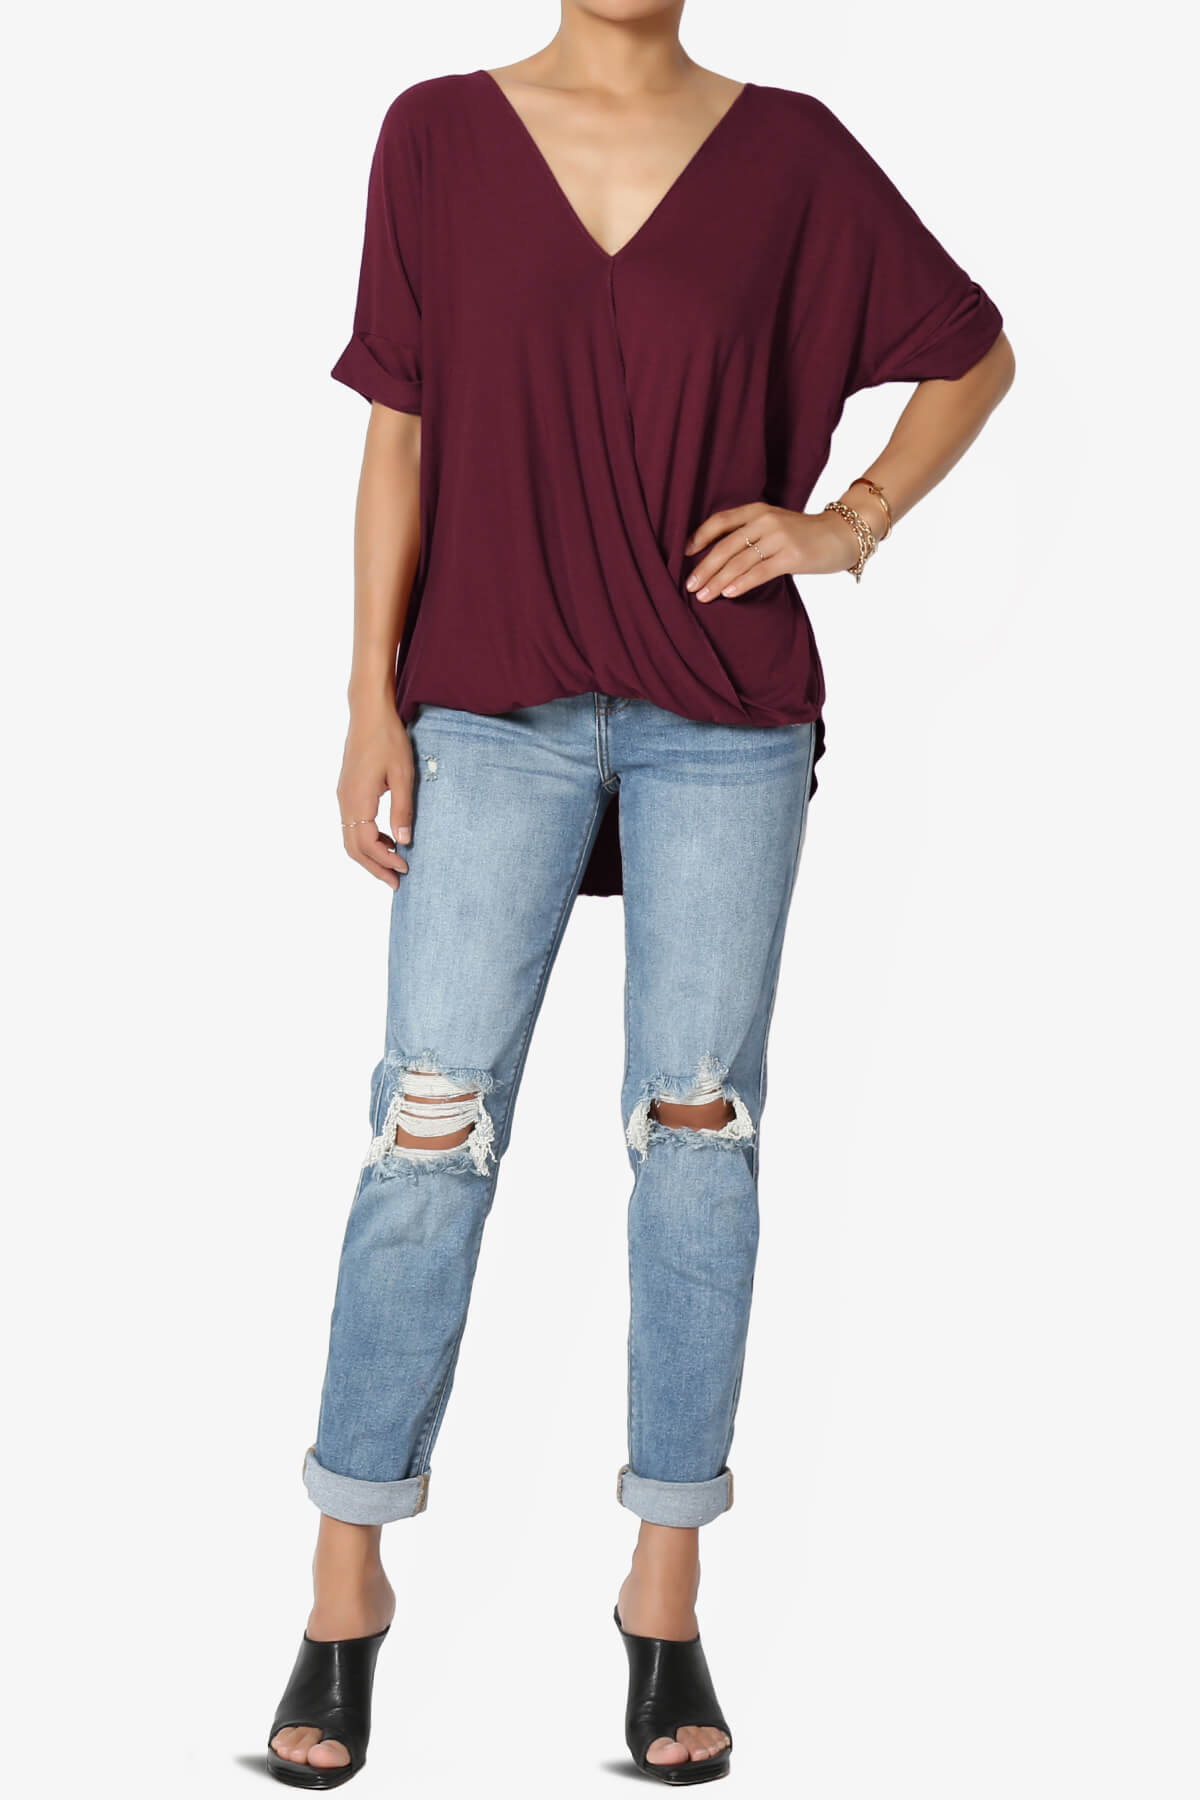 Load image into Gallery viewer, Tackle Wrap Hi-Low Crepe Knit Top DARK BURGUNDY_6
